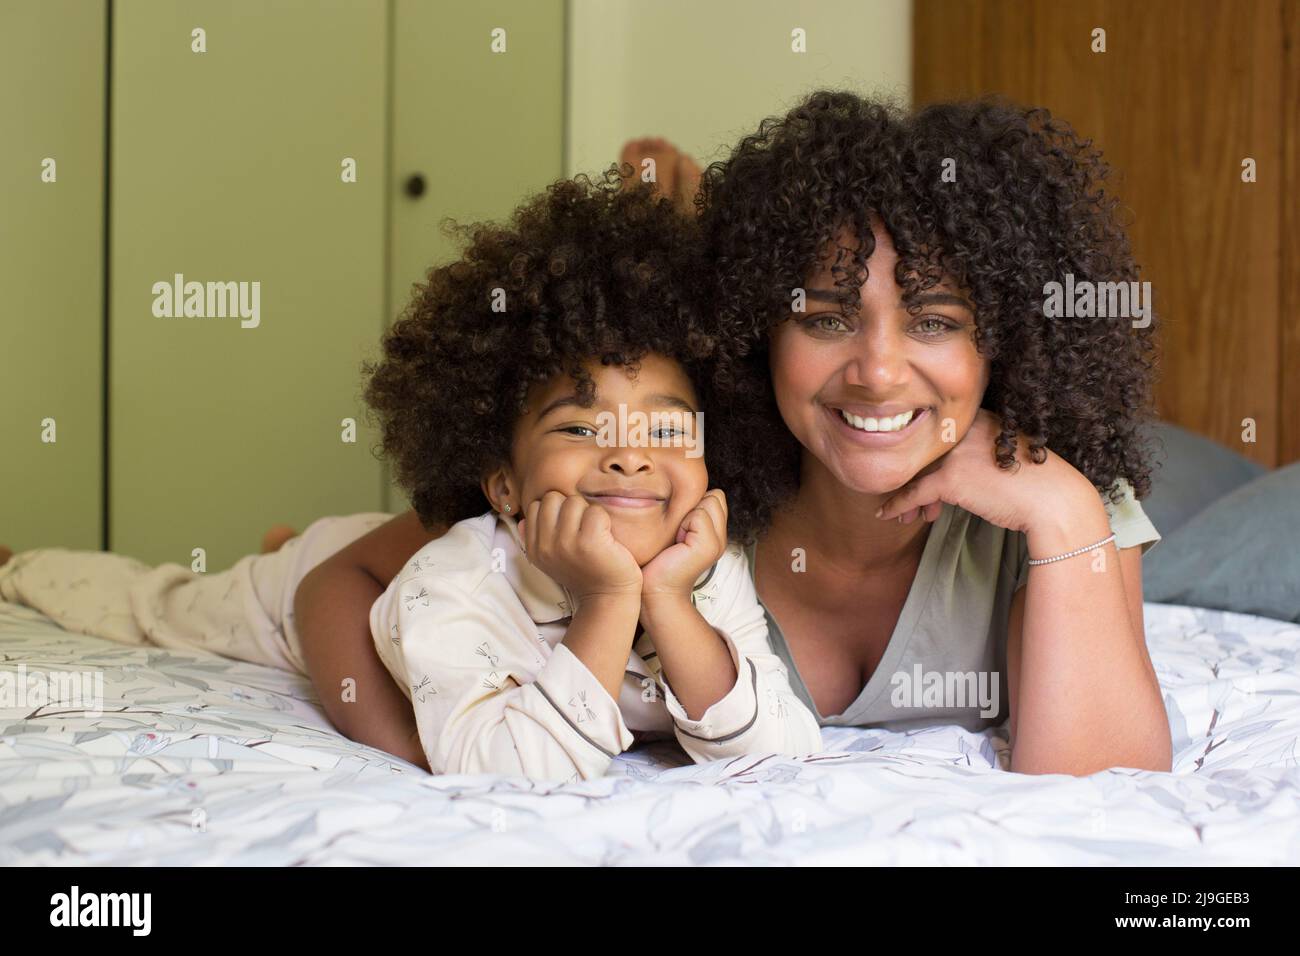 Smiling mother embracing her daughter in bedroom Stock Photo